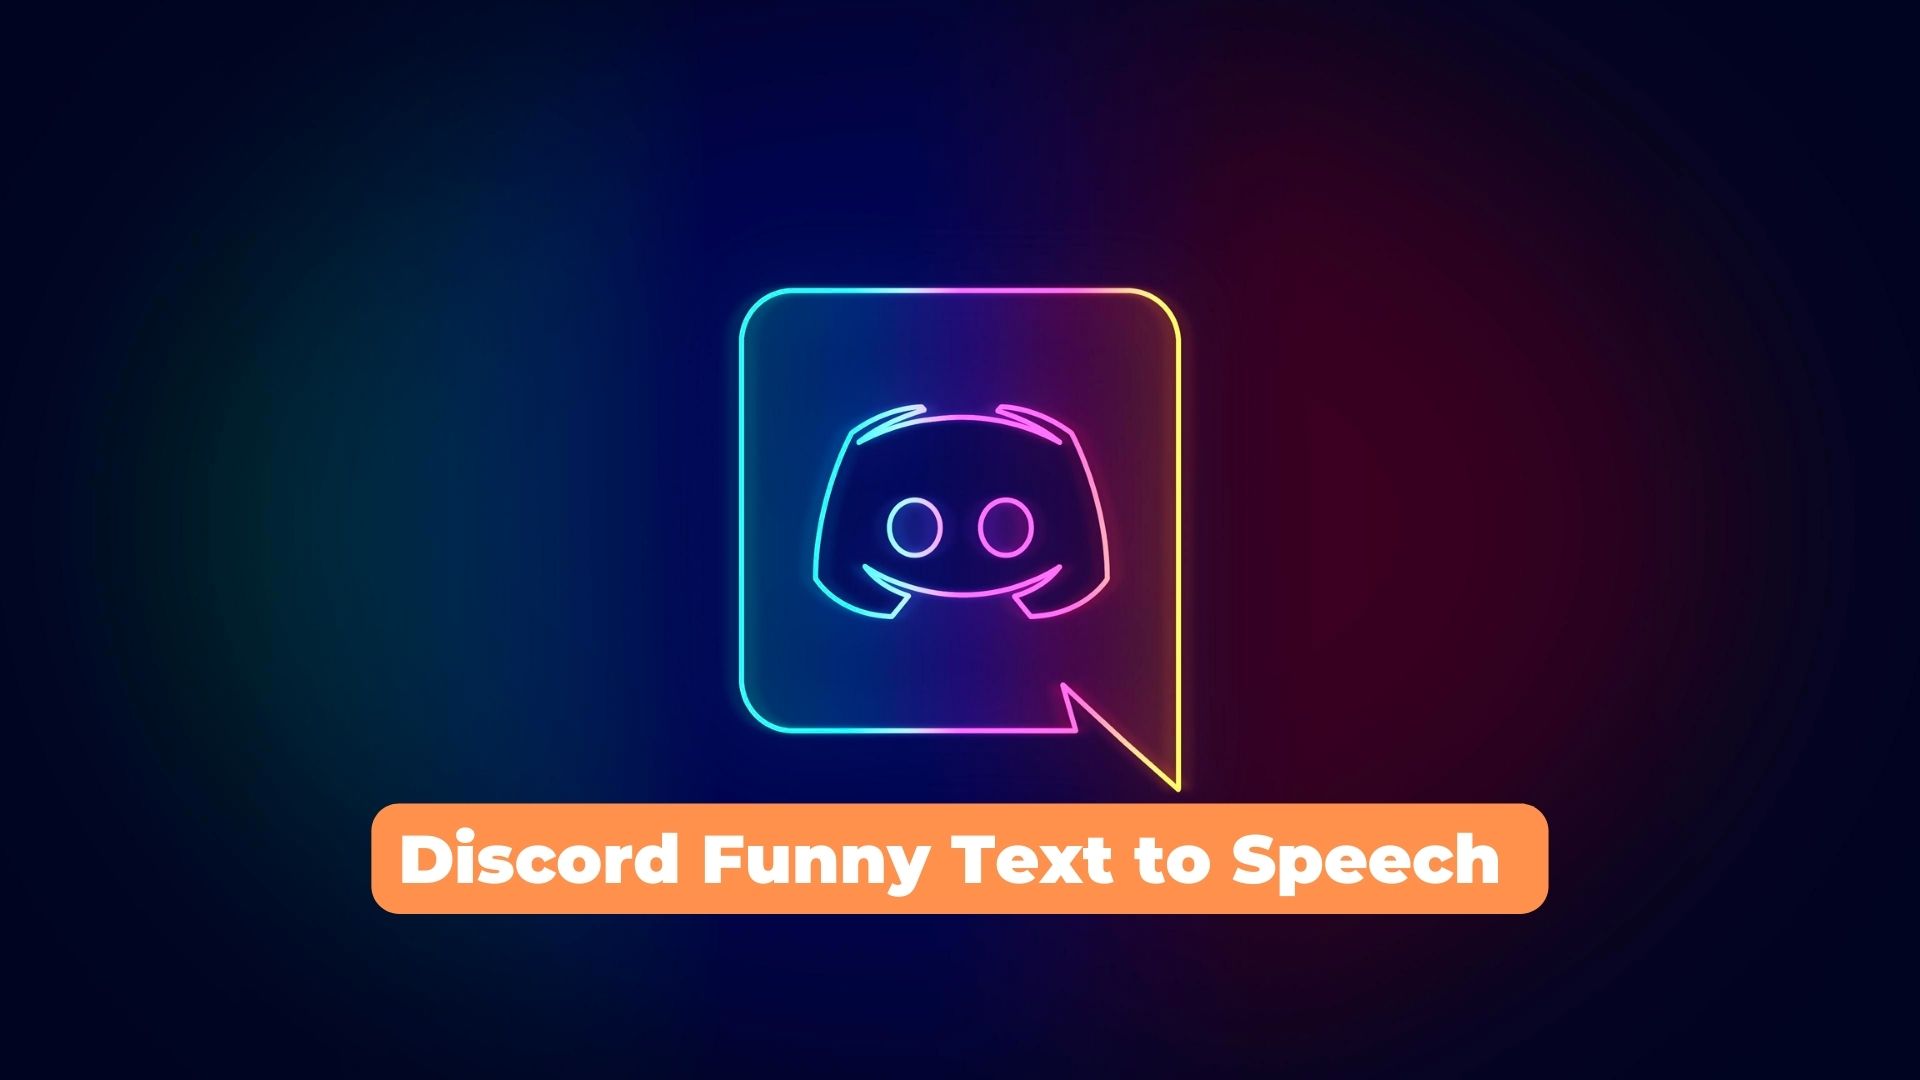 Discord Funny Text to Speech